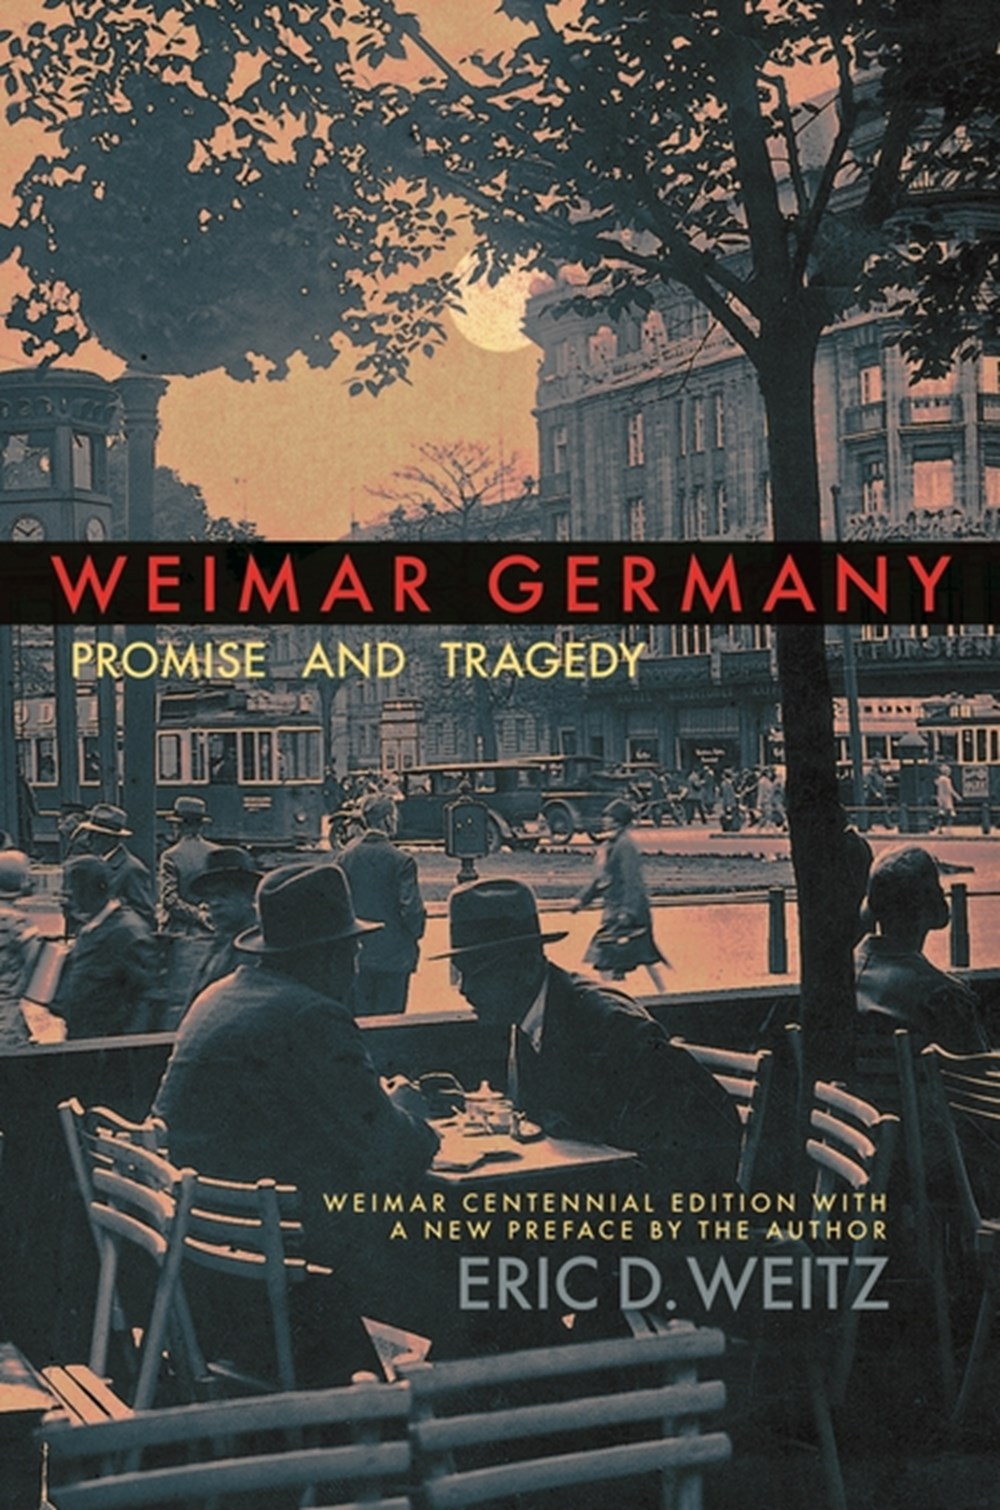 Weimar Germany: Promise and Tragedy (Weimar Centennial)